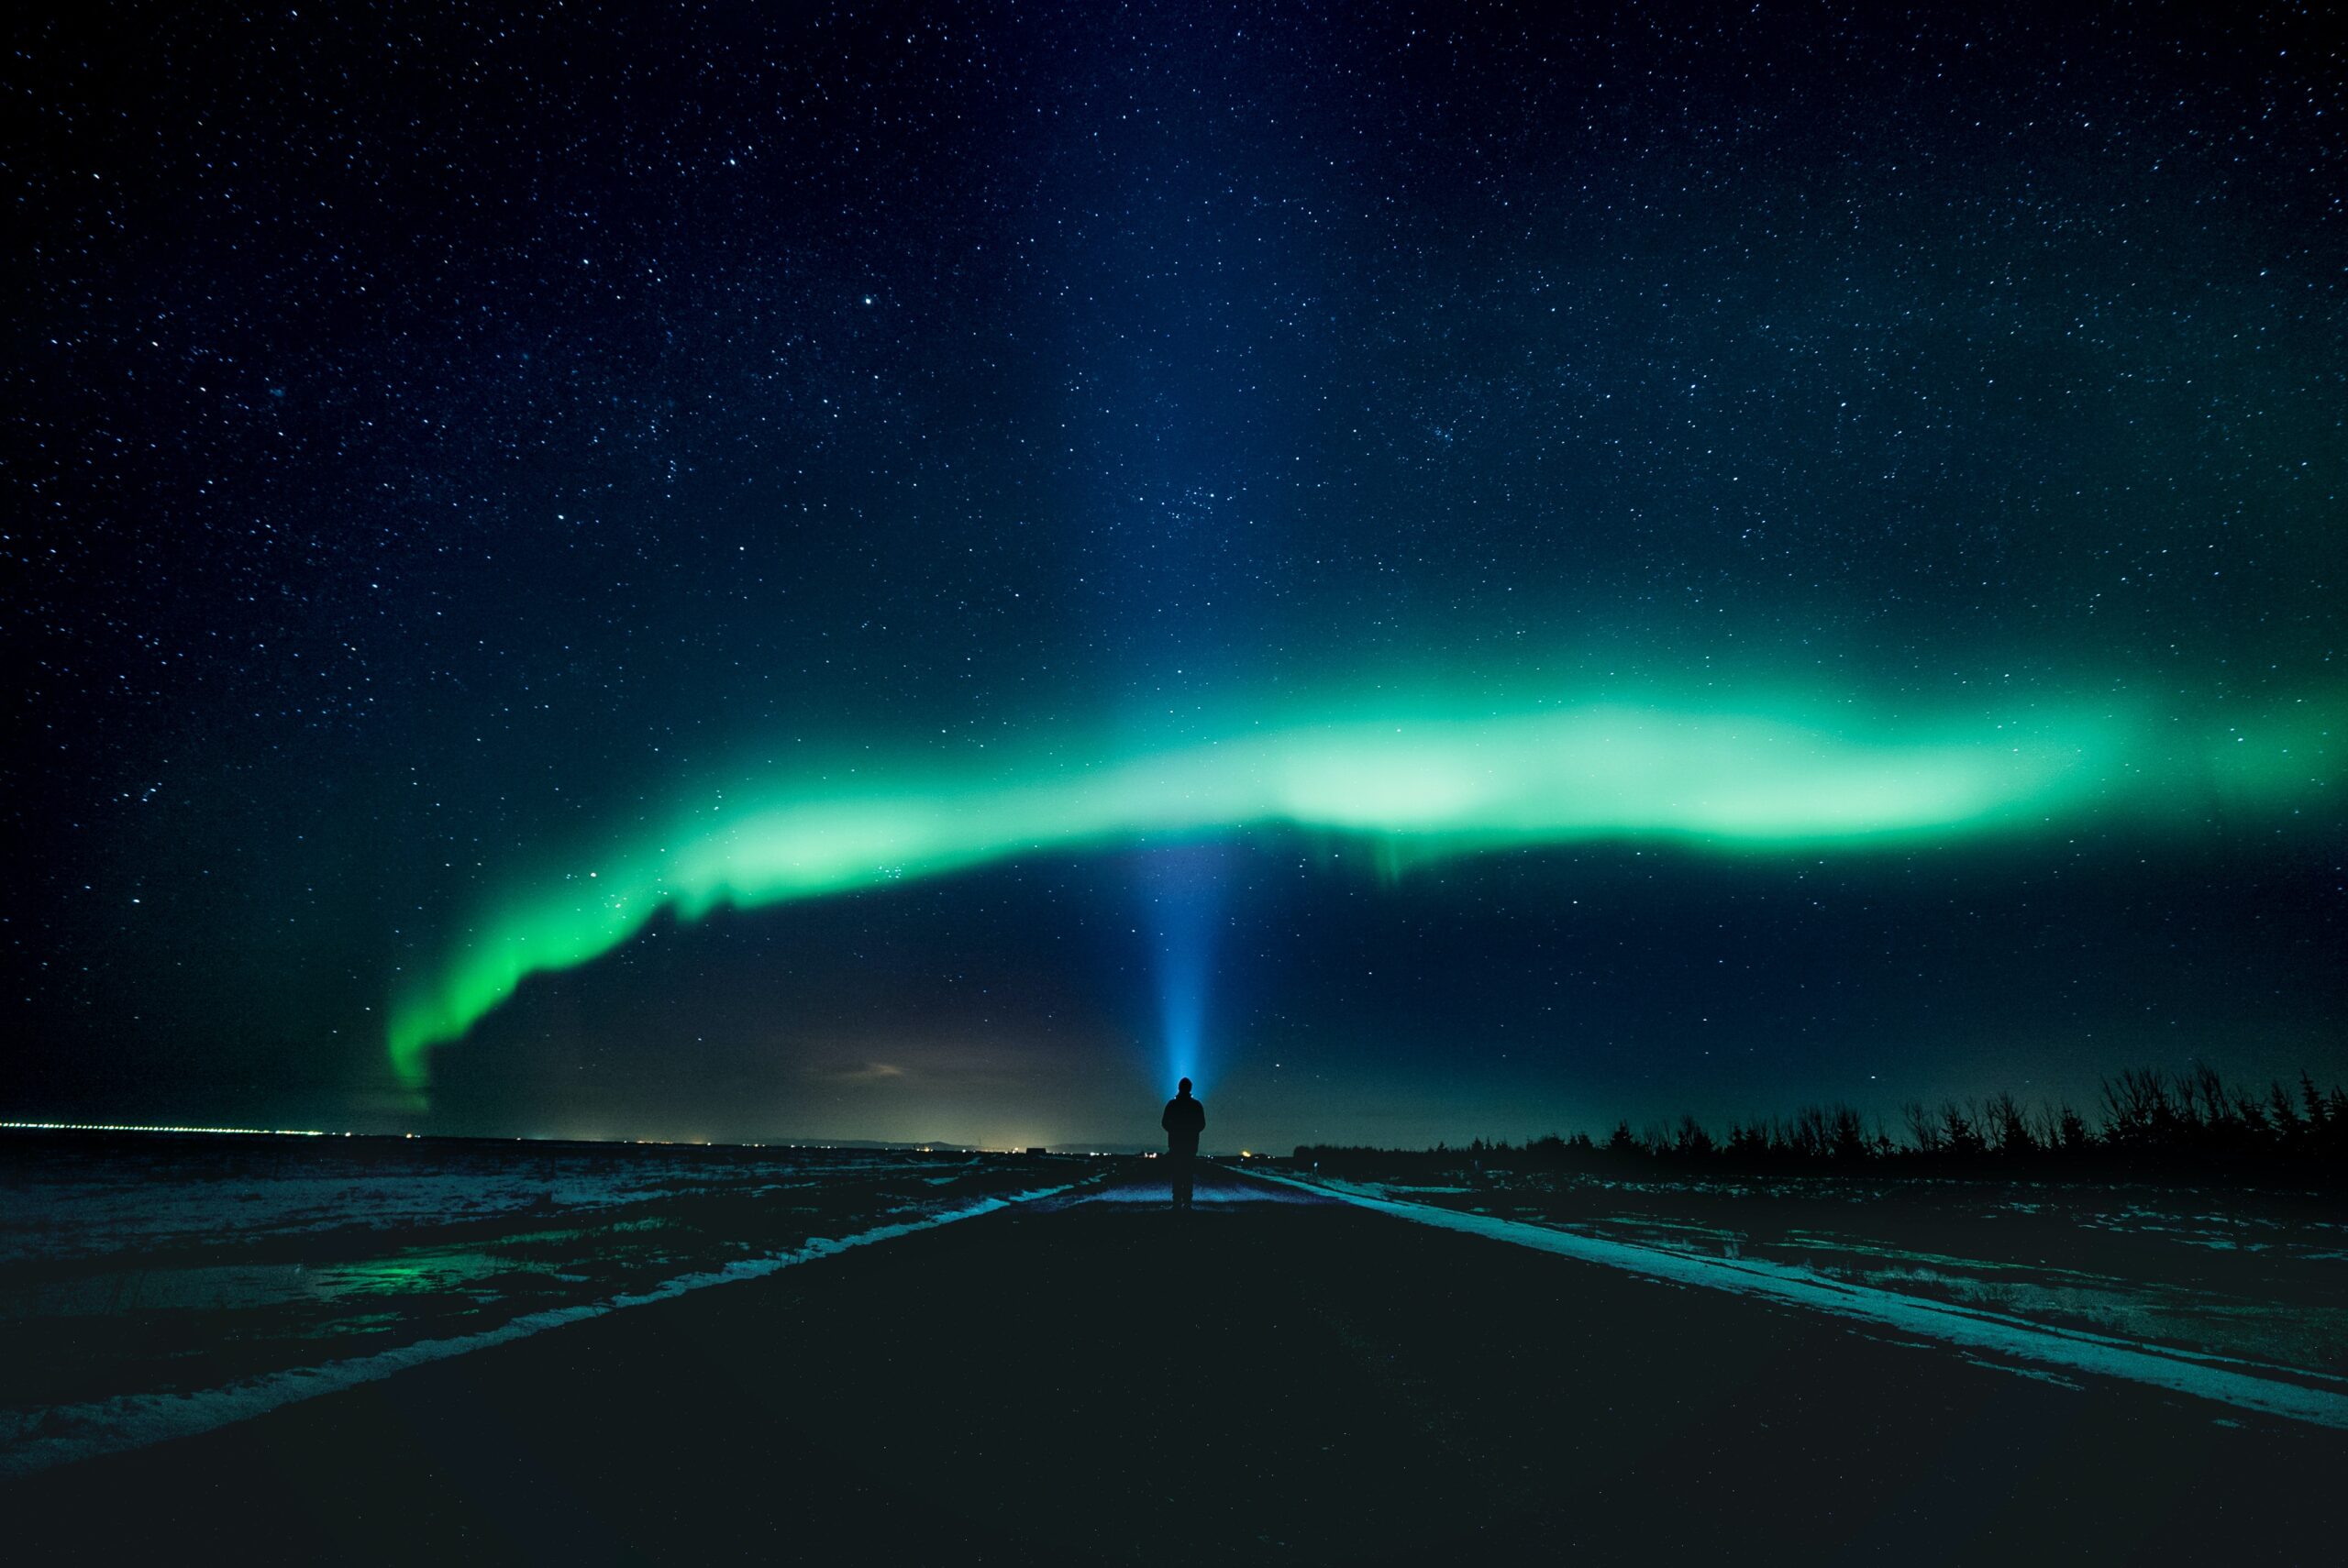 Iceland: The Country of the Northern Lights